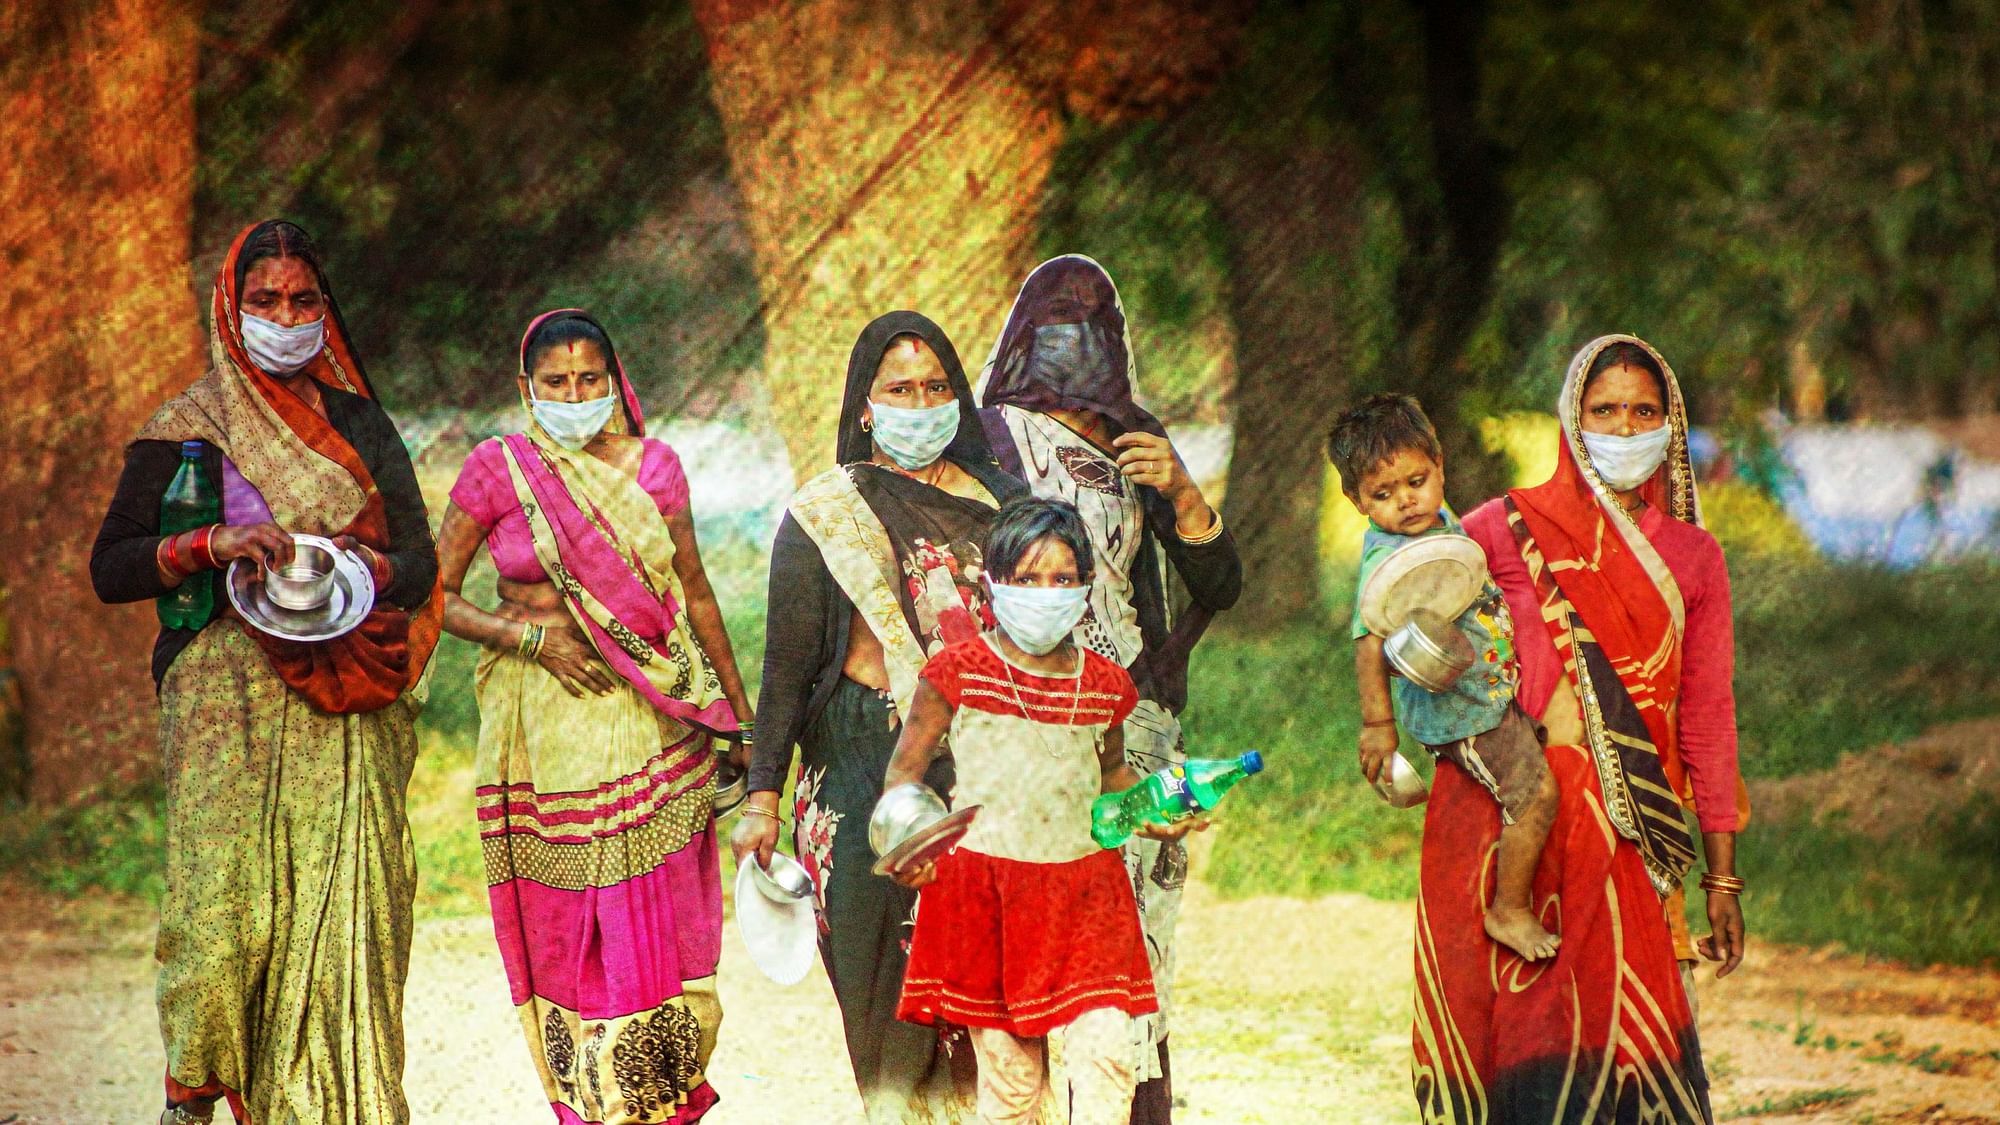  Women arrive to collect food served at a camp during the nationwide lockdown, in New Delhi. (Image for representation)